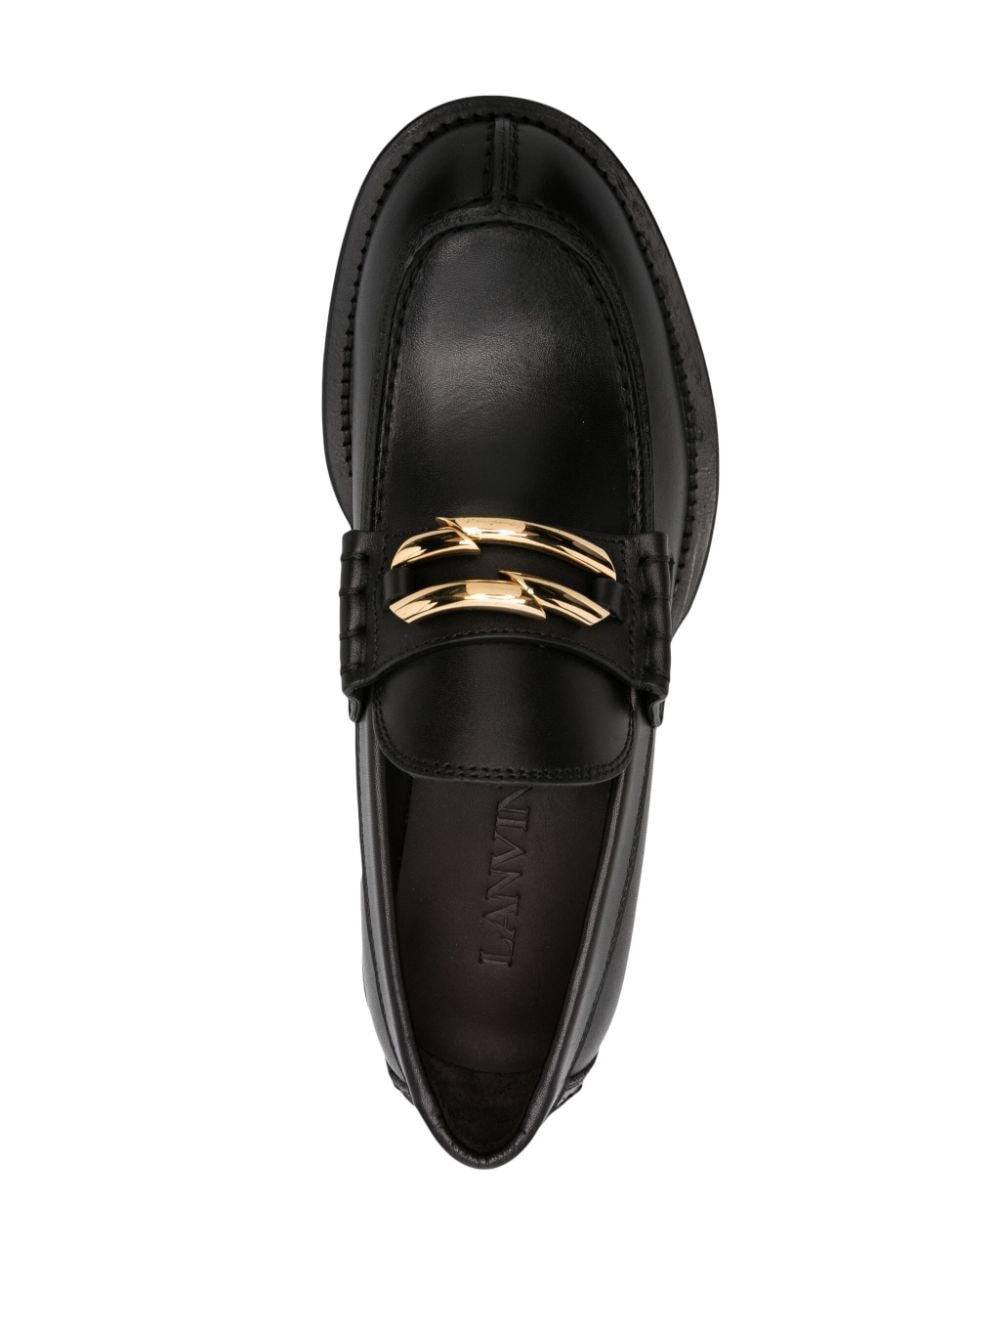 LANVIN Sleek and Sophisticated Buckled Loafers for Women